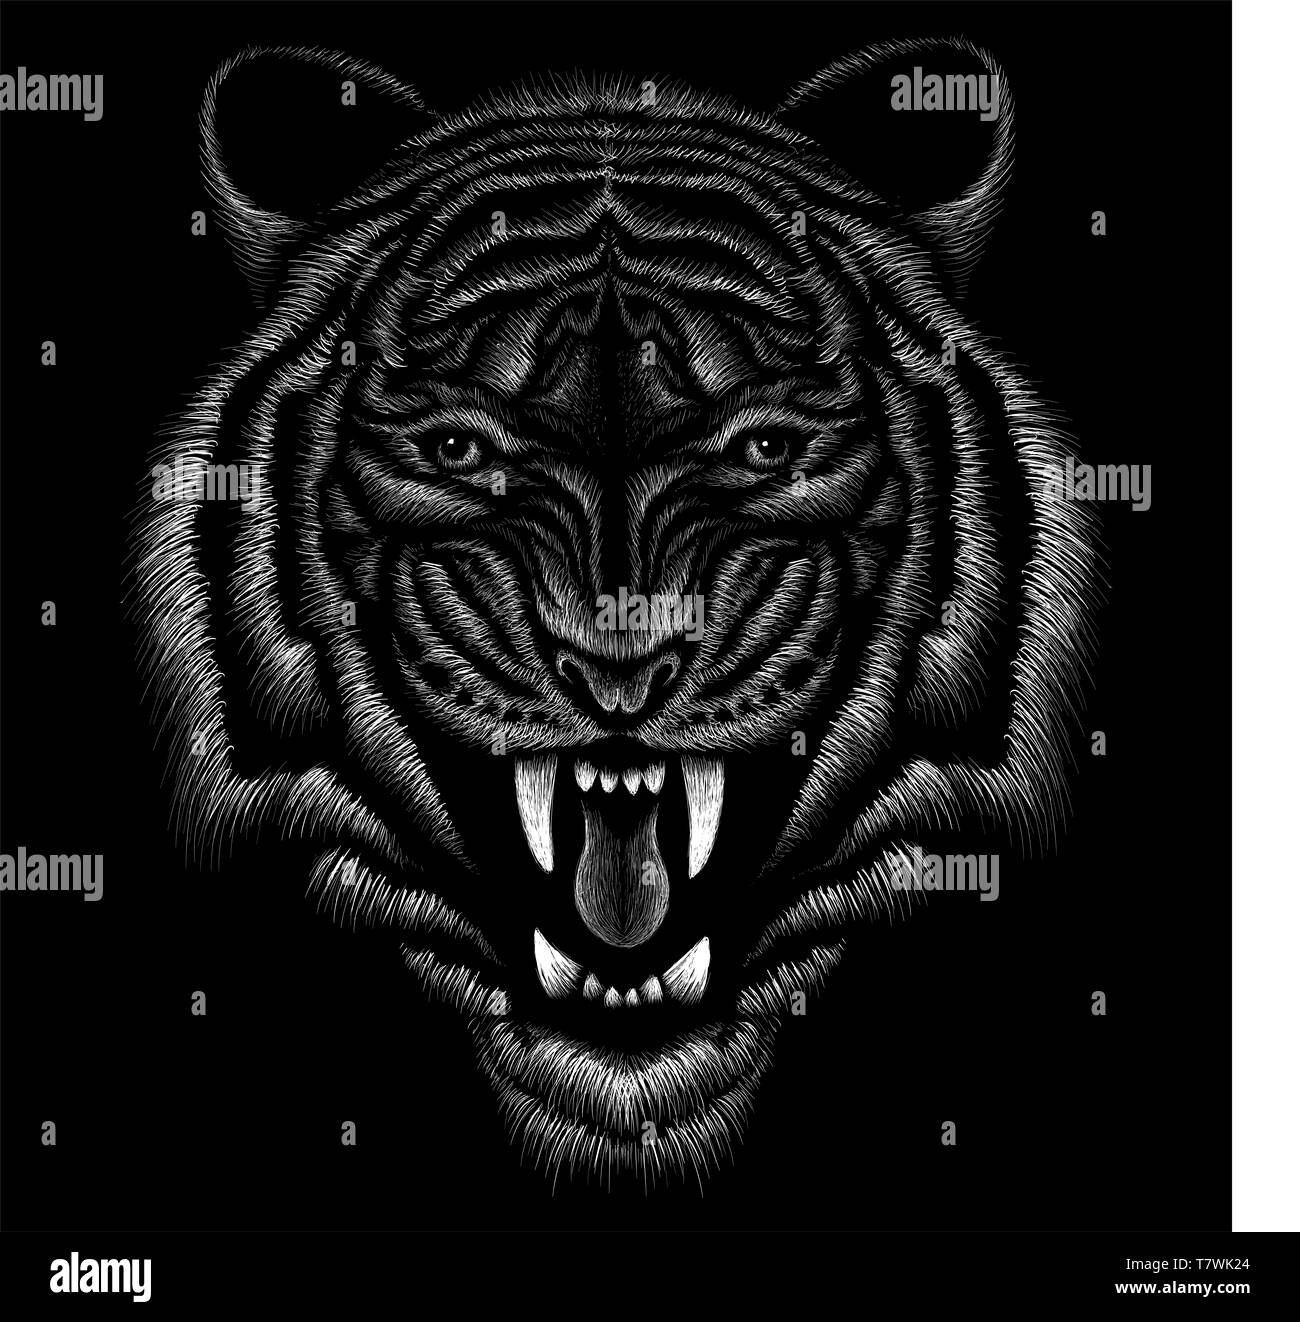 Black tiger Black and White Stock Photos & Images - Alamy